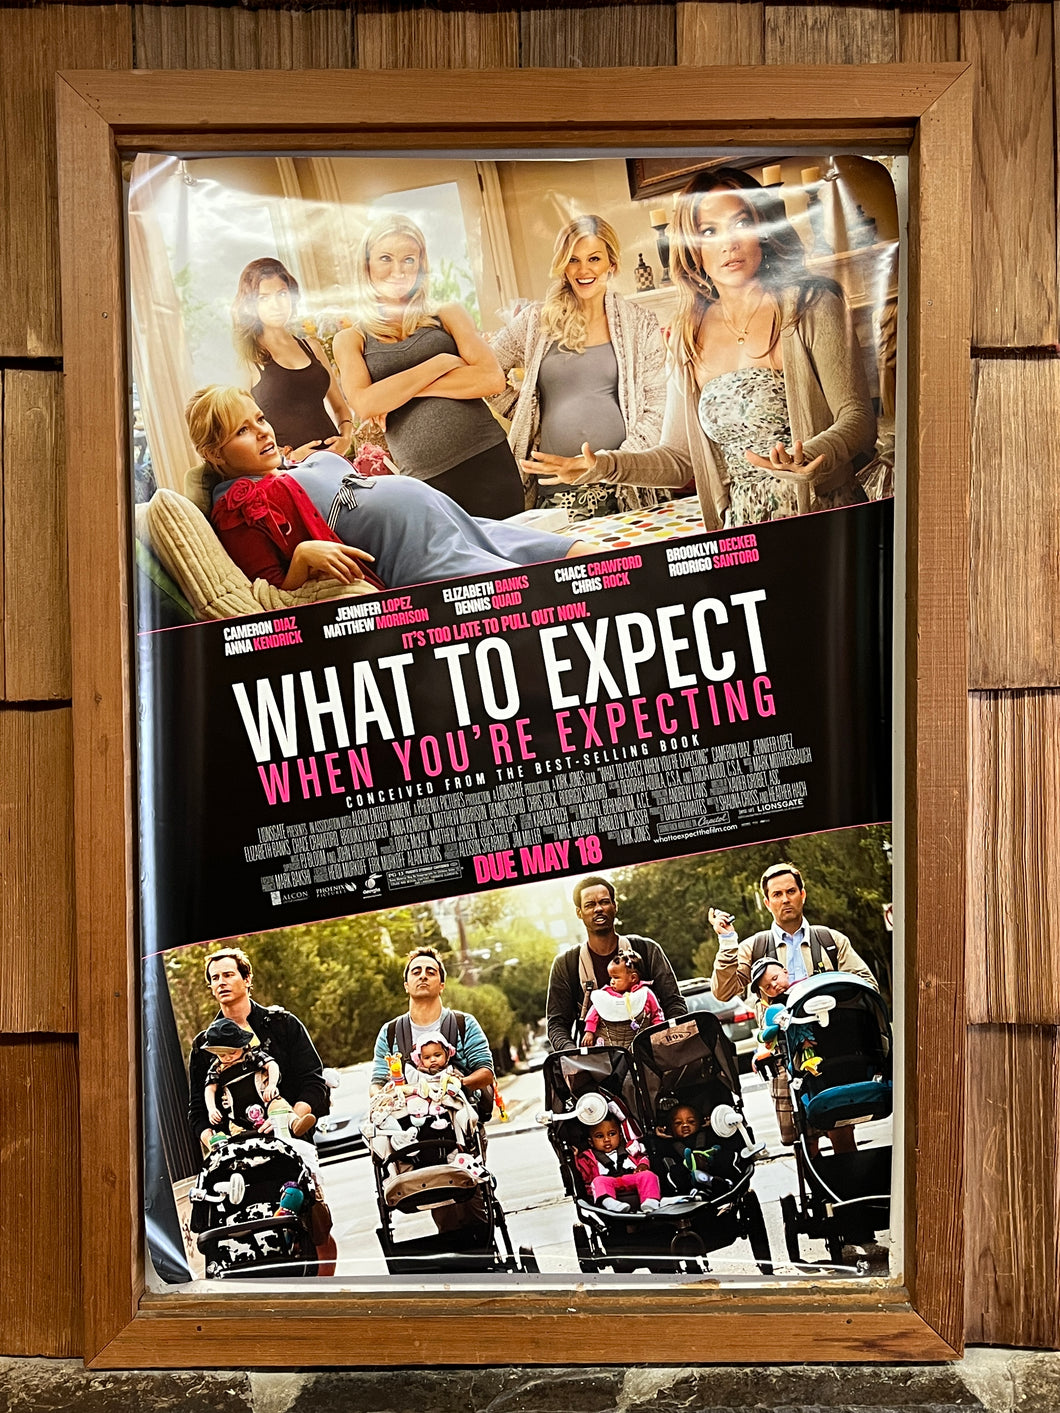 What to Expect When You're Expecting (2012)